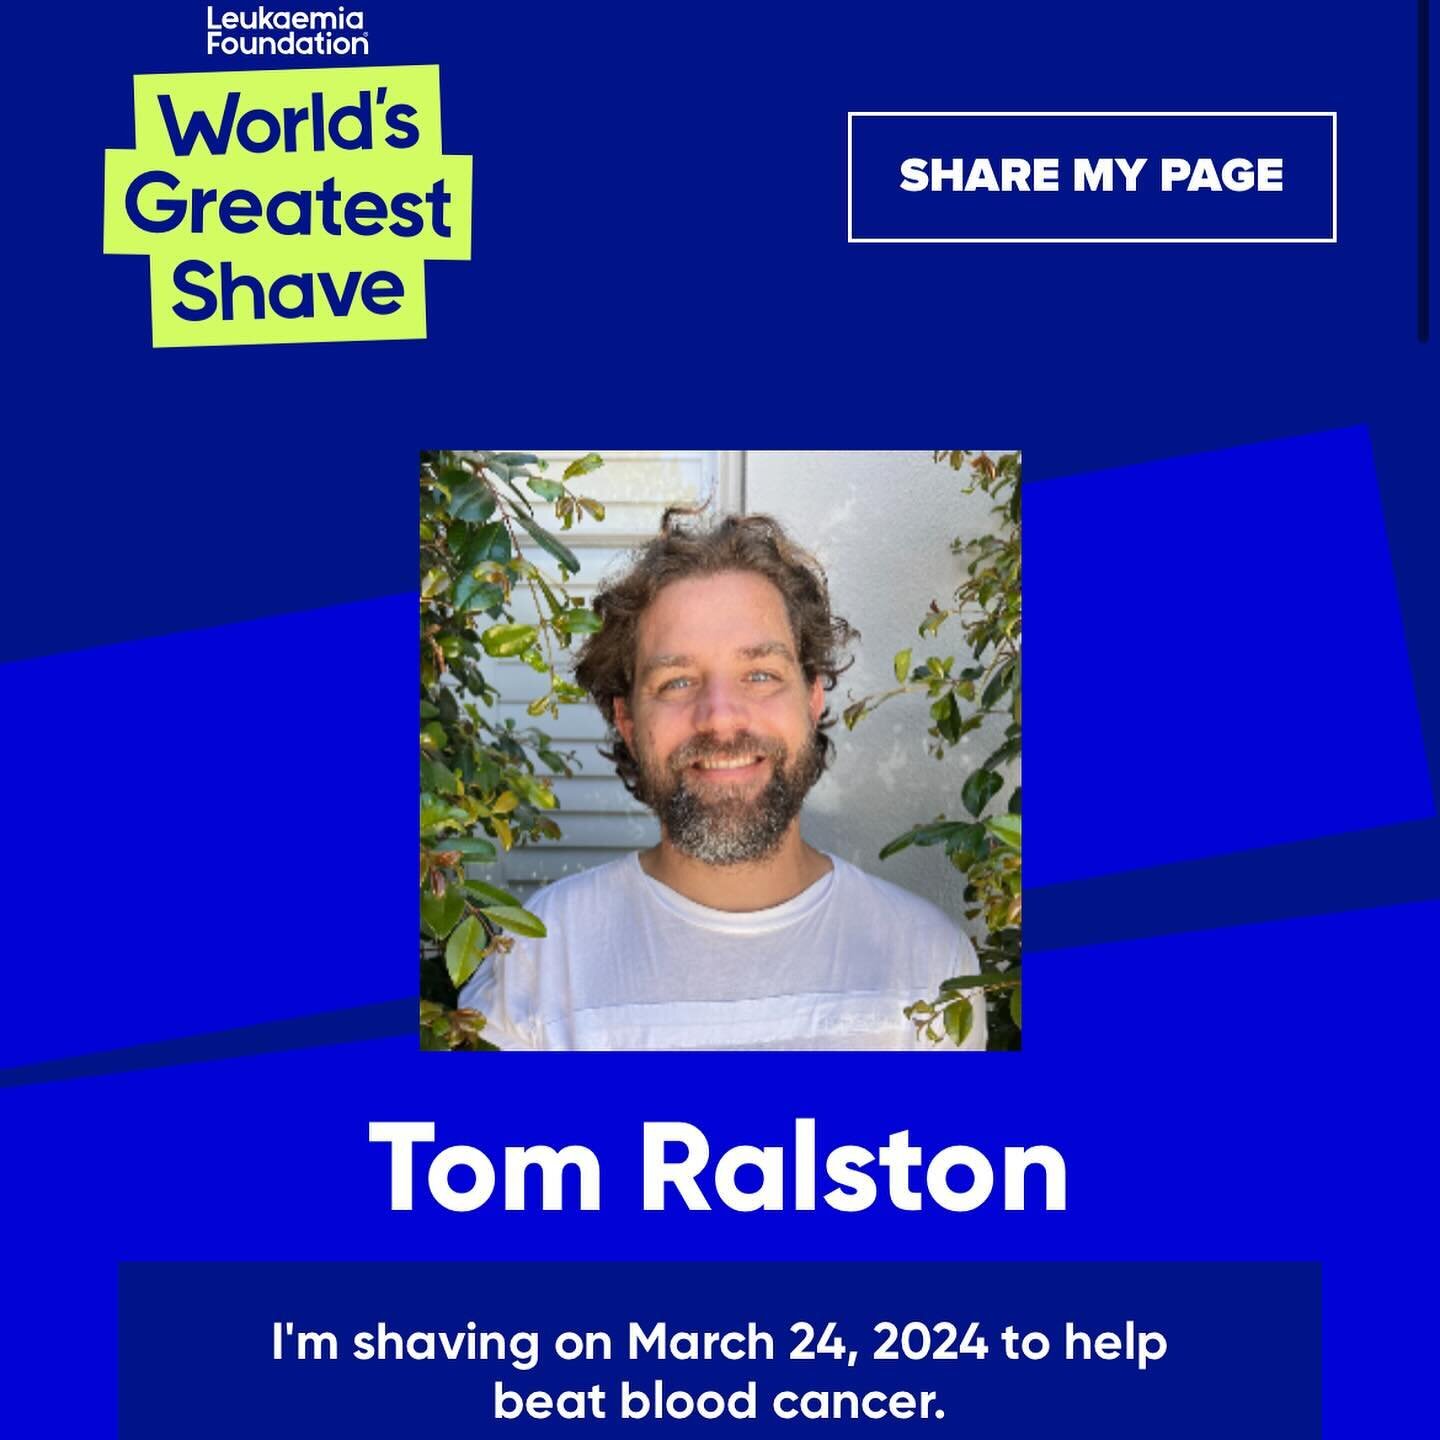 Hi there. On the 24th of March I will be shaving my head and face during the &ldquo;World&rsquo;s Greatest Shave&rdquo; to raise money for the Leukaemia Foundation. 

I&rsquo;m so grateful for any donations and I hope together we can reach our goal o